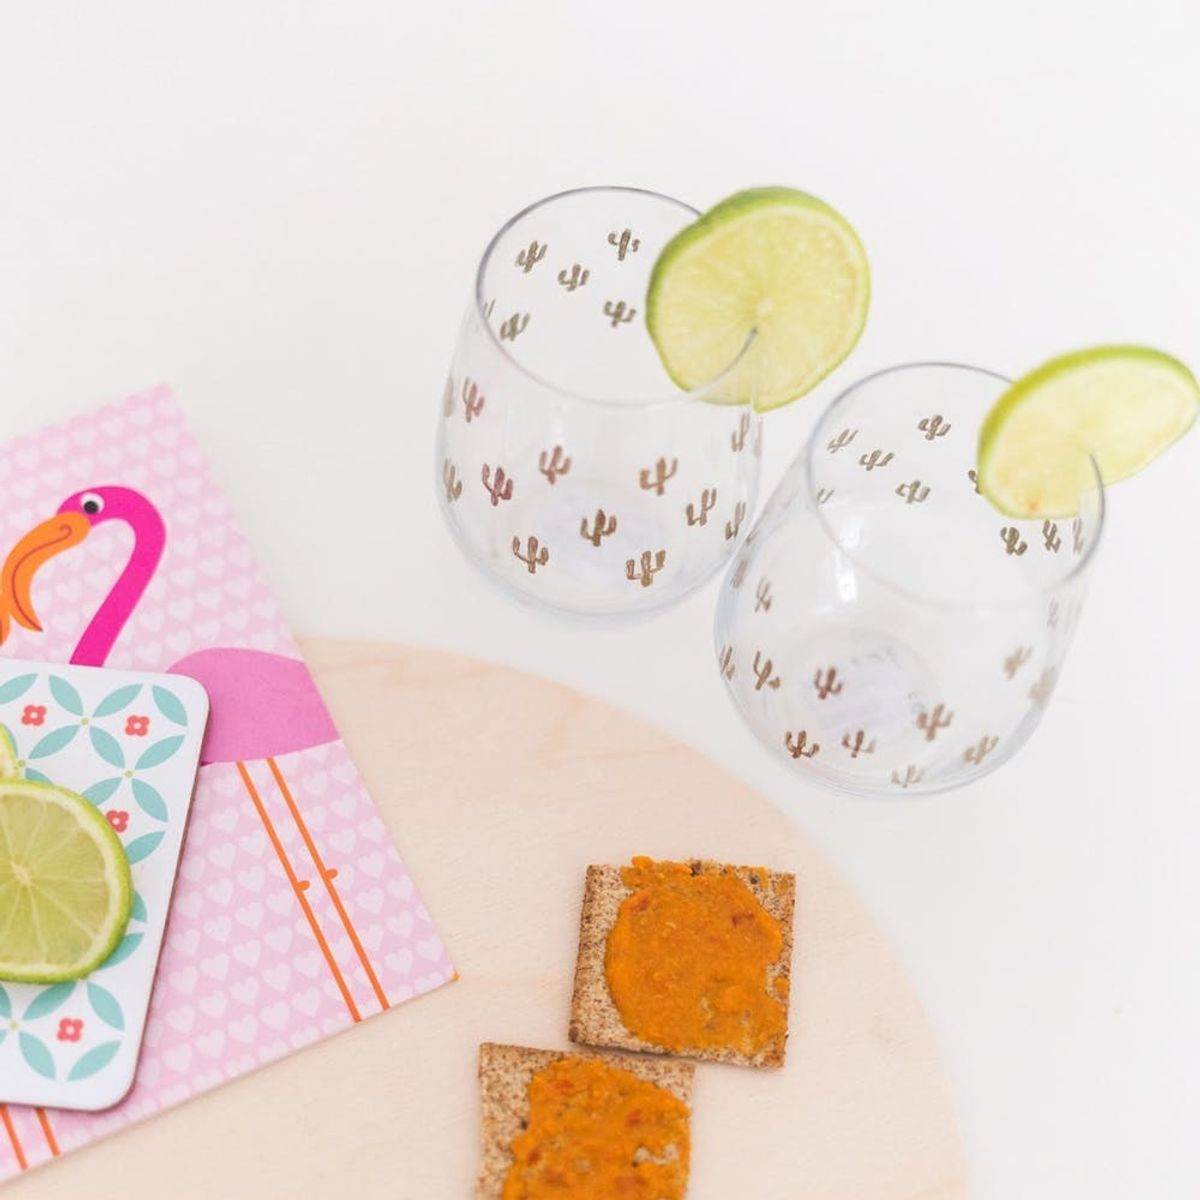 DIY These Urban Outfitters-Inspired Cacti Glasses in Minutes